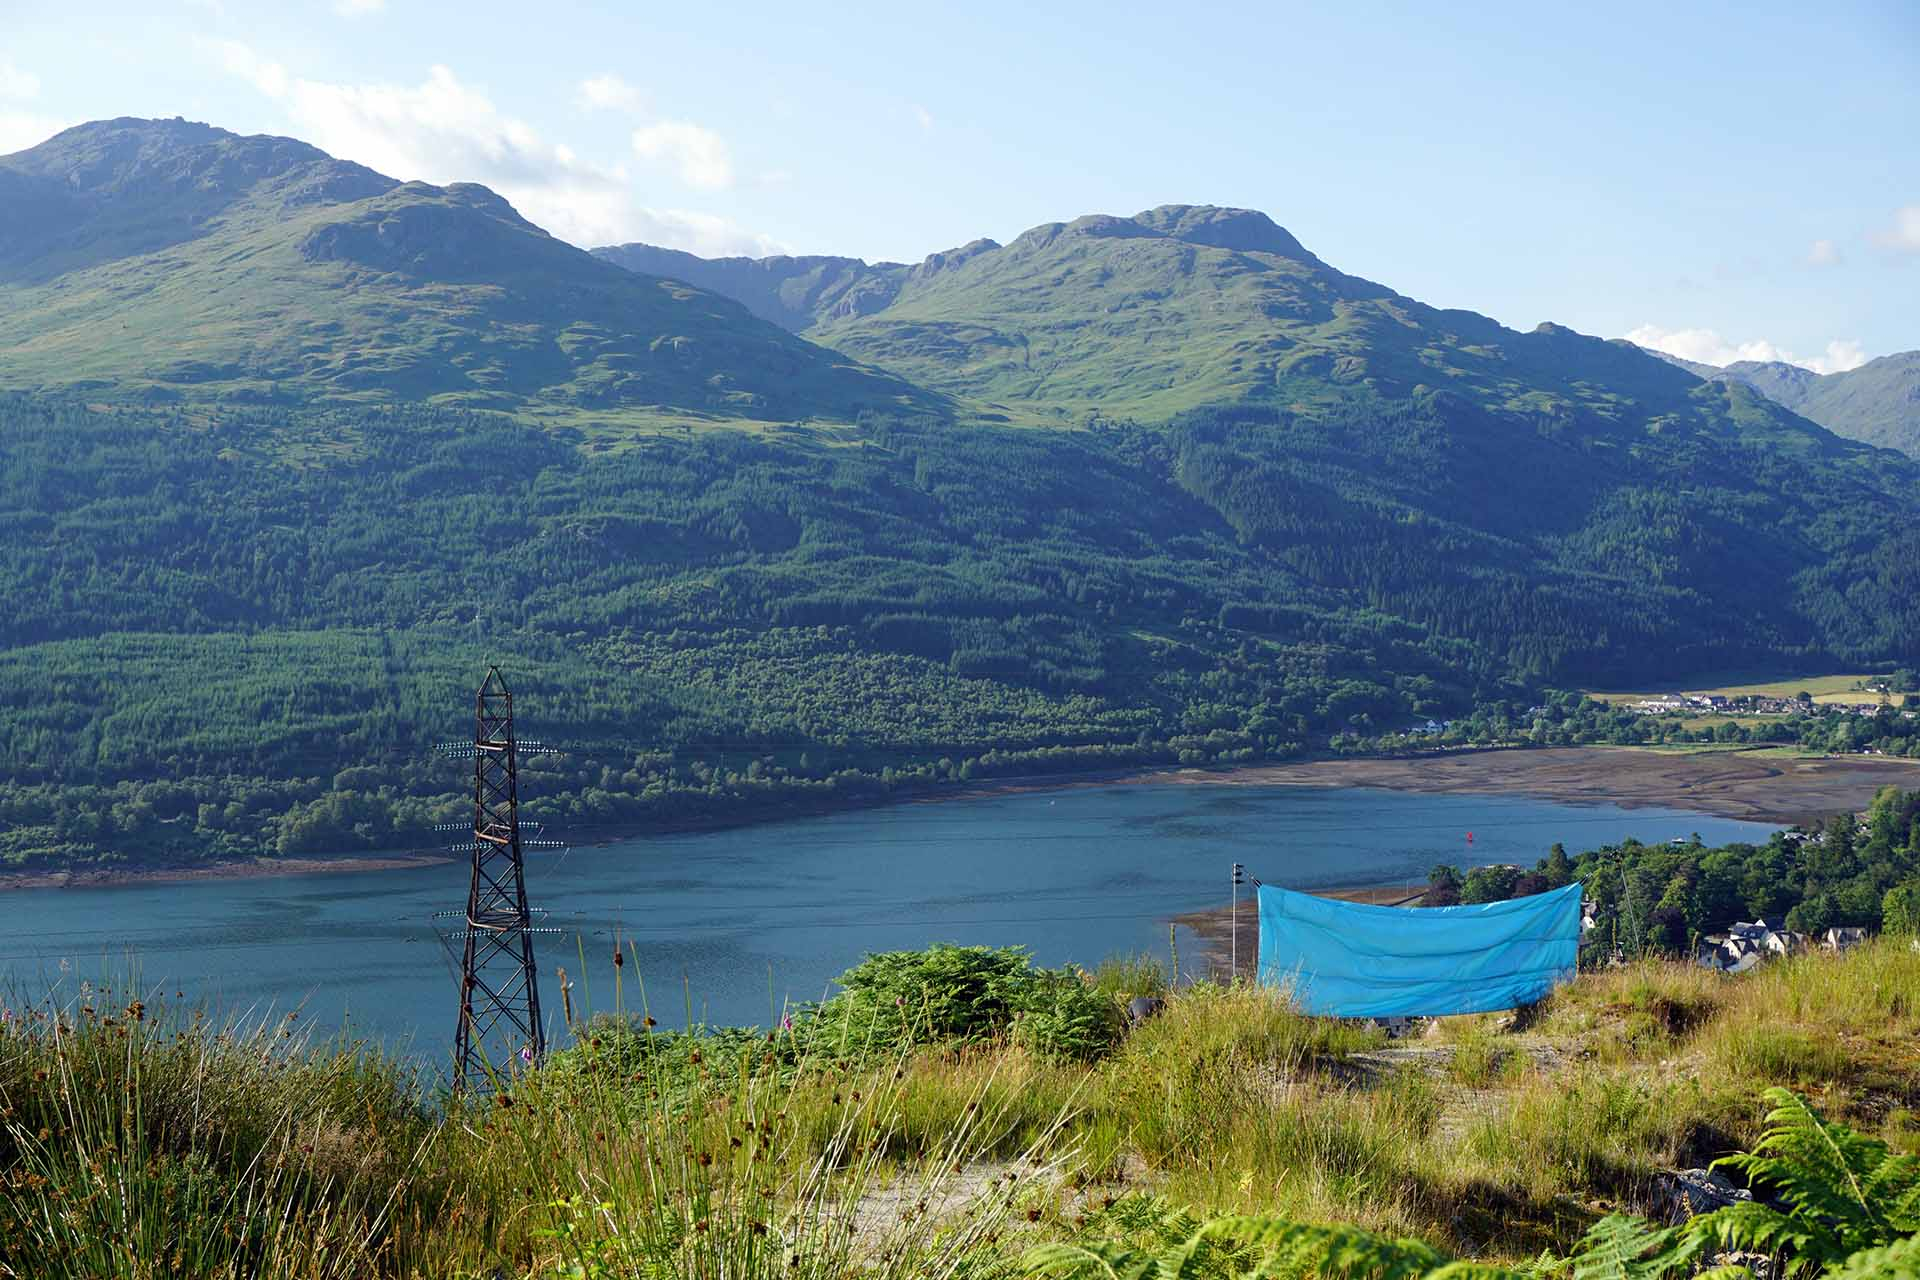 a faraway view of baby blue two toned taffeta (1.5 m x 4.5 m) stretch across a path situated half way up a mountain. The blue fabric looks over loch long and out towards more mountains. 